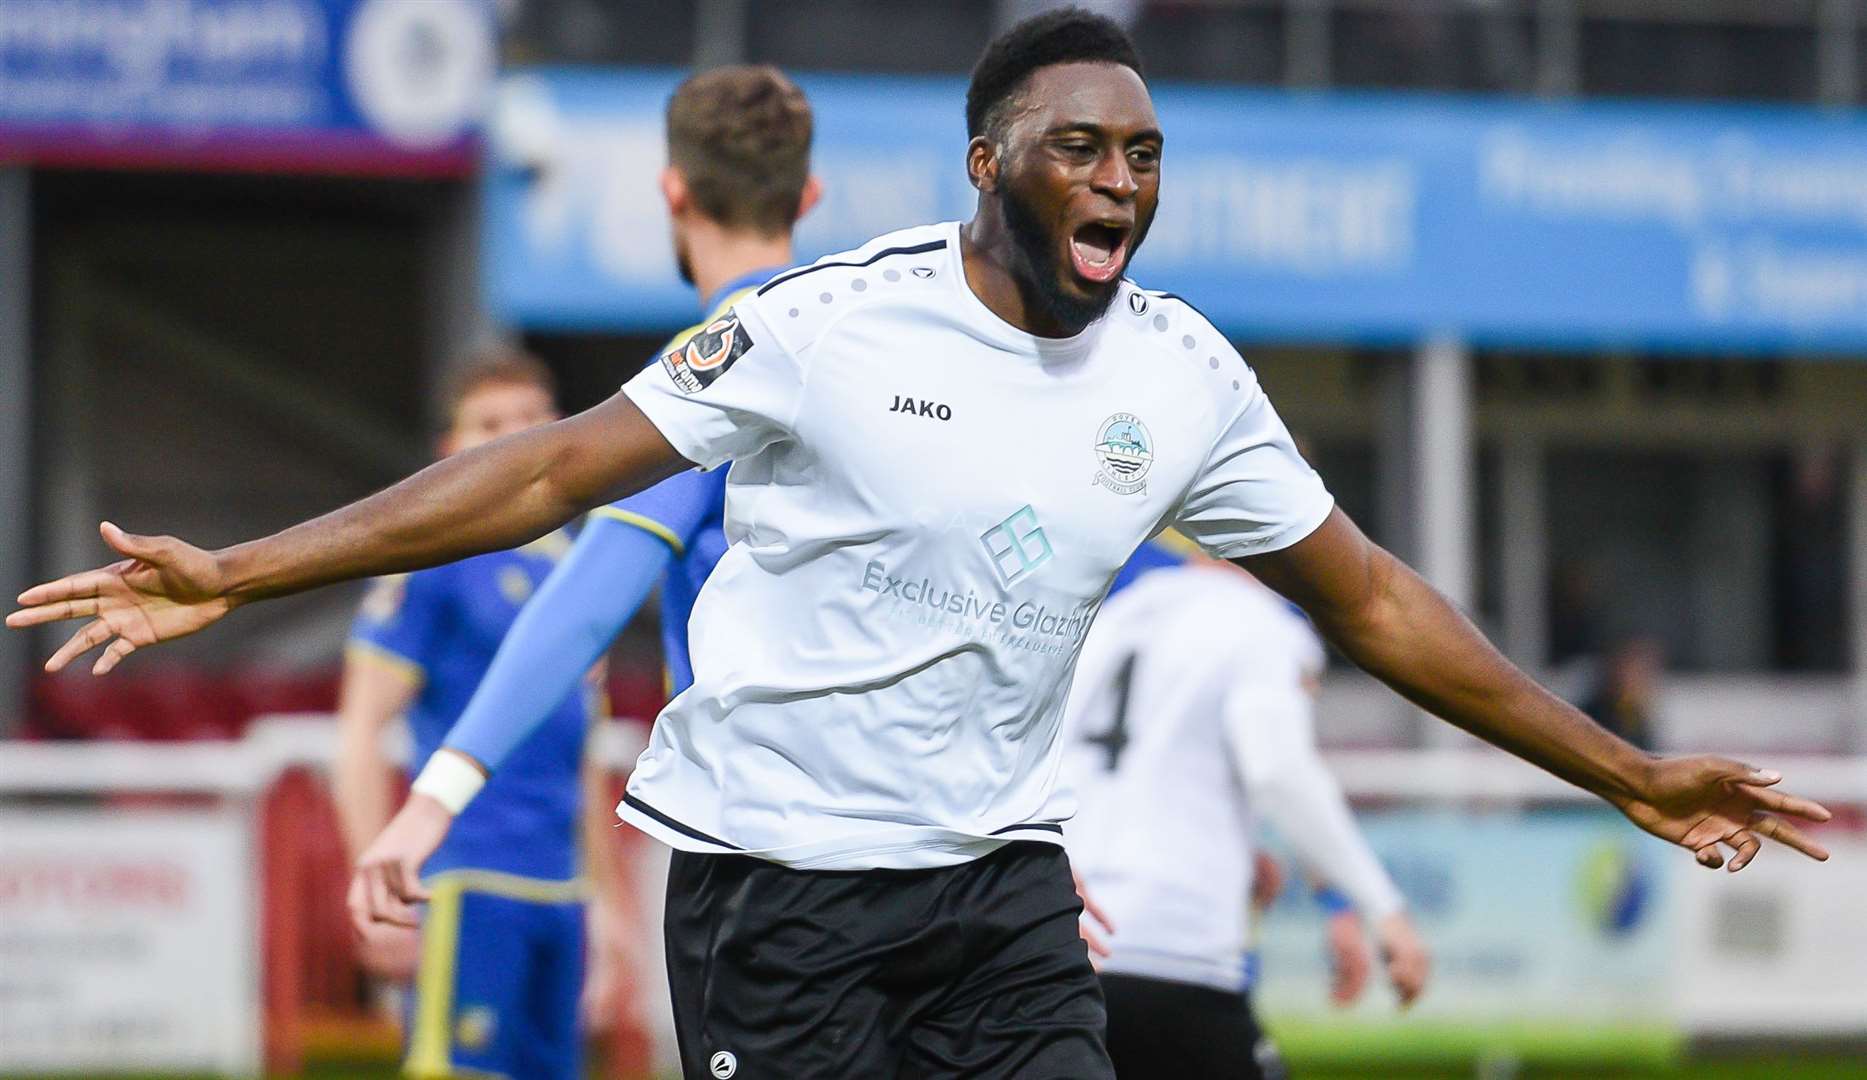 Inih Effiong scored both of Dover's goals in their 2-0 victory at Stockport County on Saturday. Picture: Alan Langley